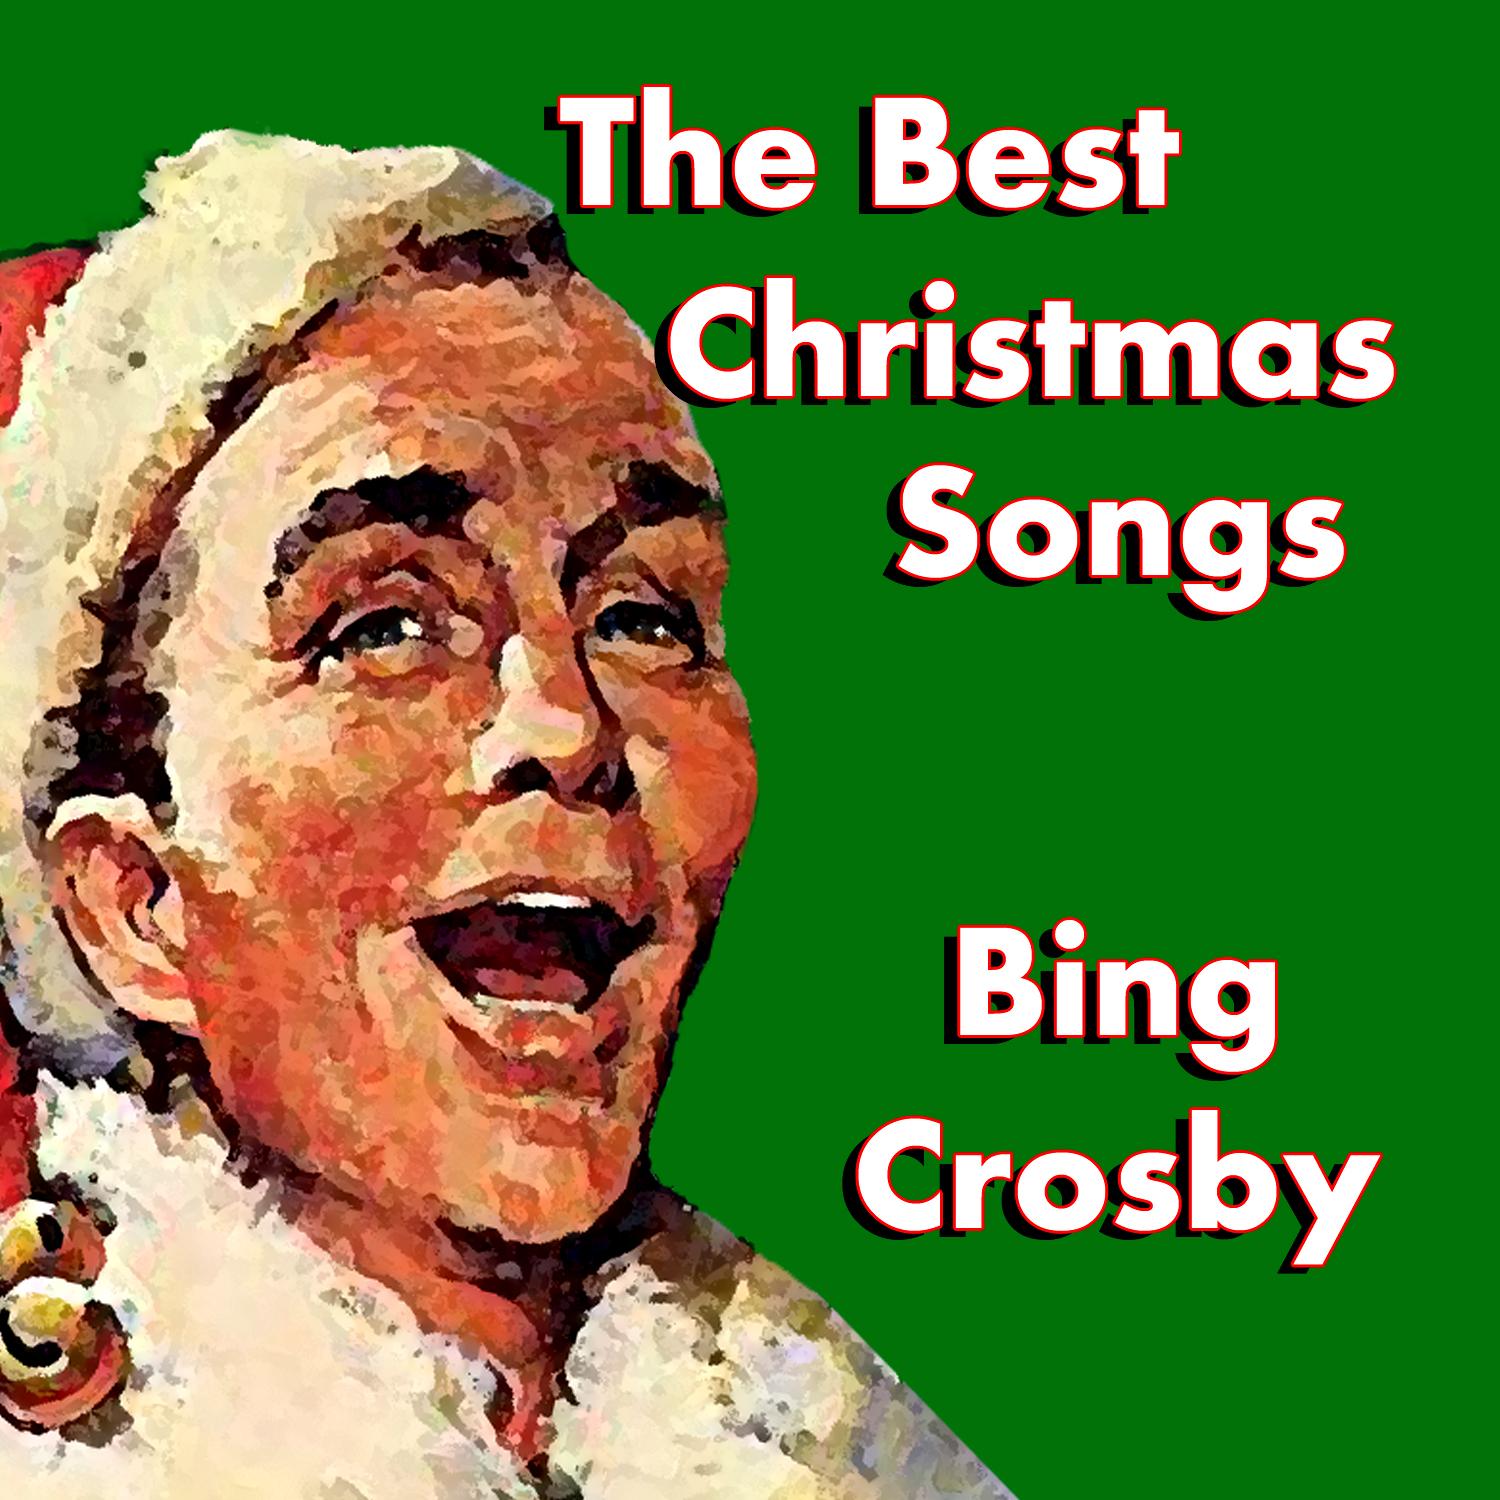 The Best of Christmas Songs